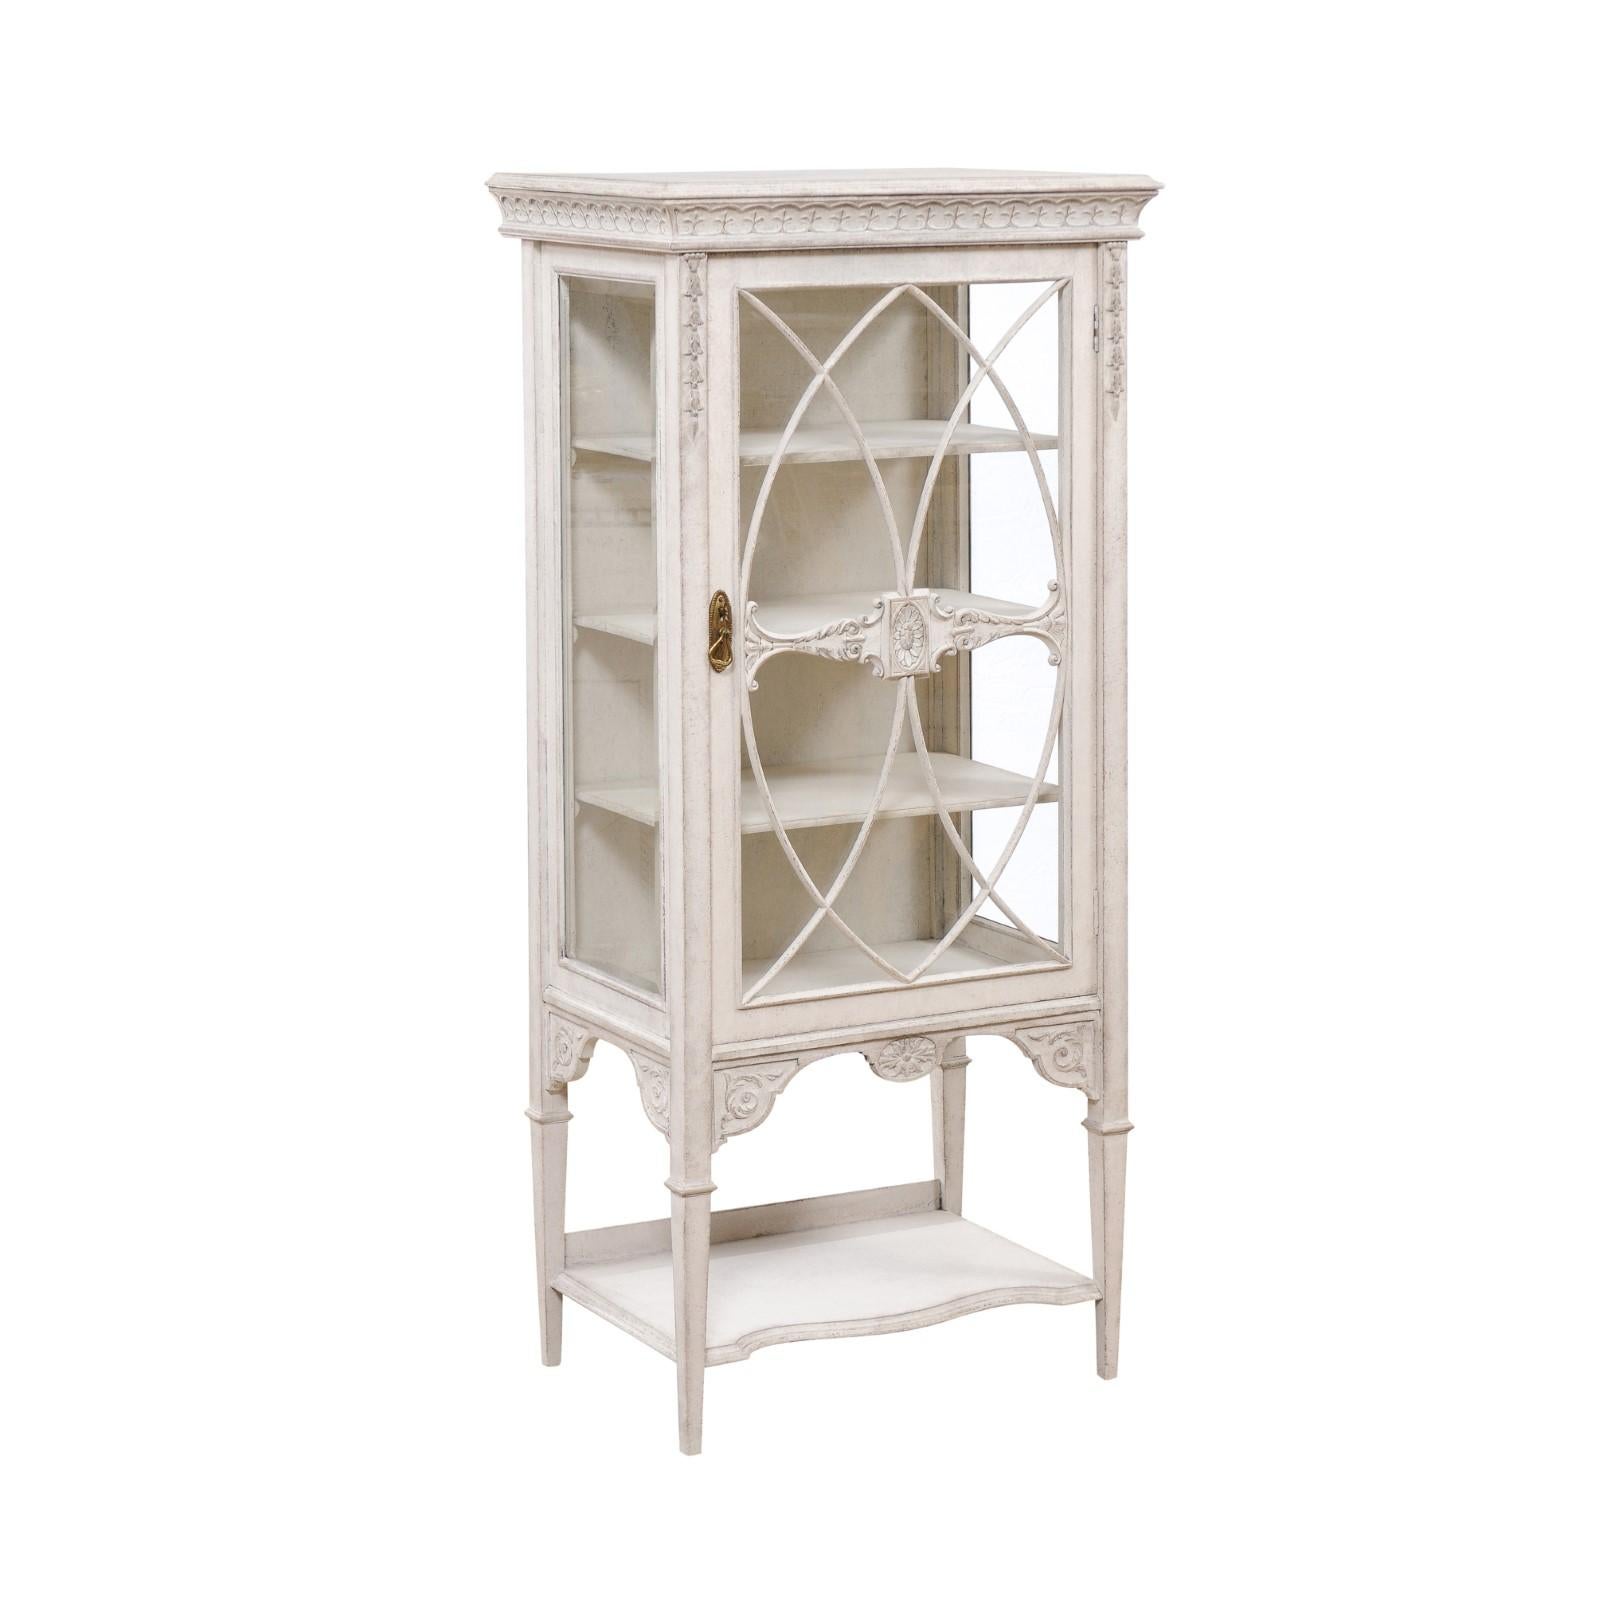 A European painted wood vitrine cabinet from the late 19th century, with richly carved décor, glass doors and lower shelf. Created on the Continent during the last decade of the 19th century, this elegant vitrine cabinet features a beveled cornice